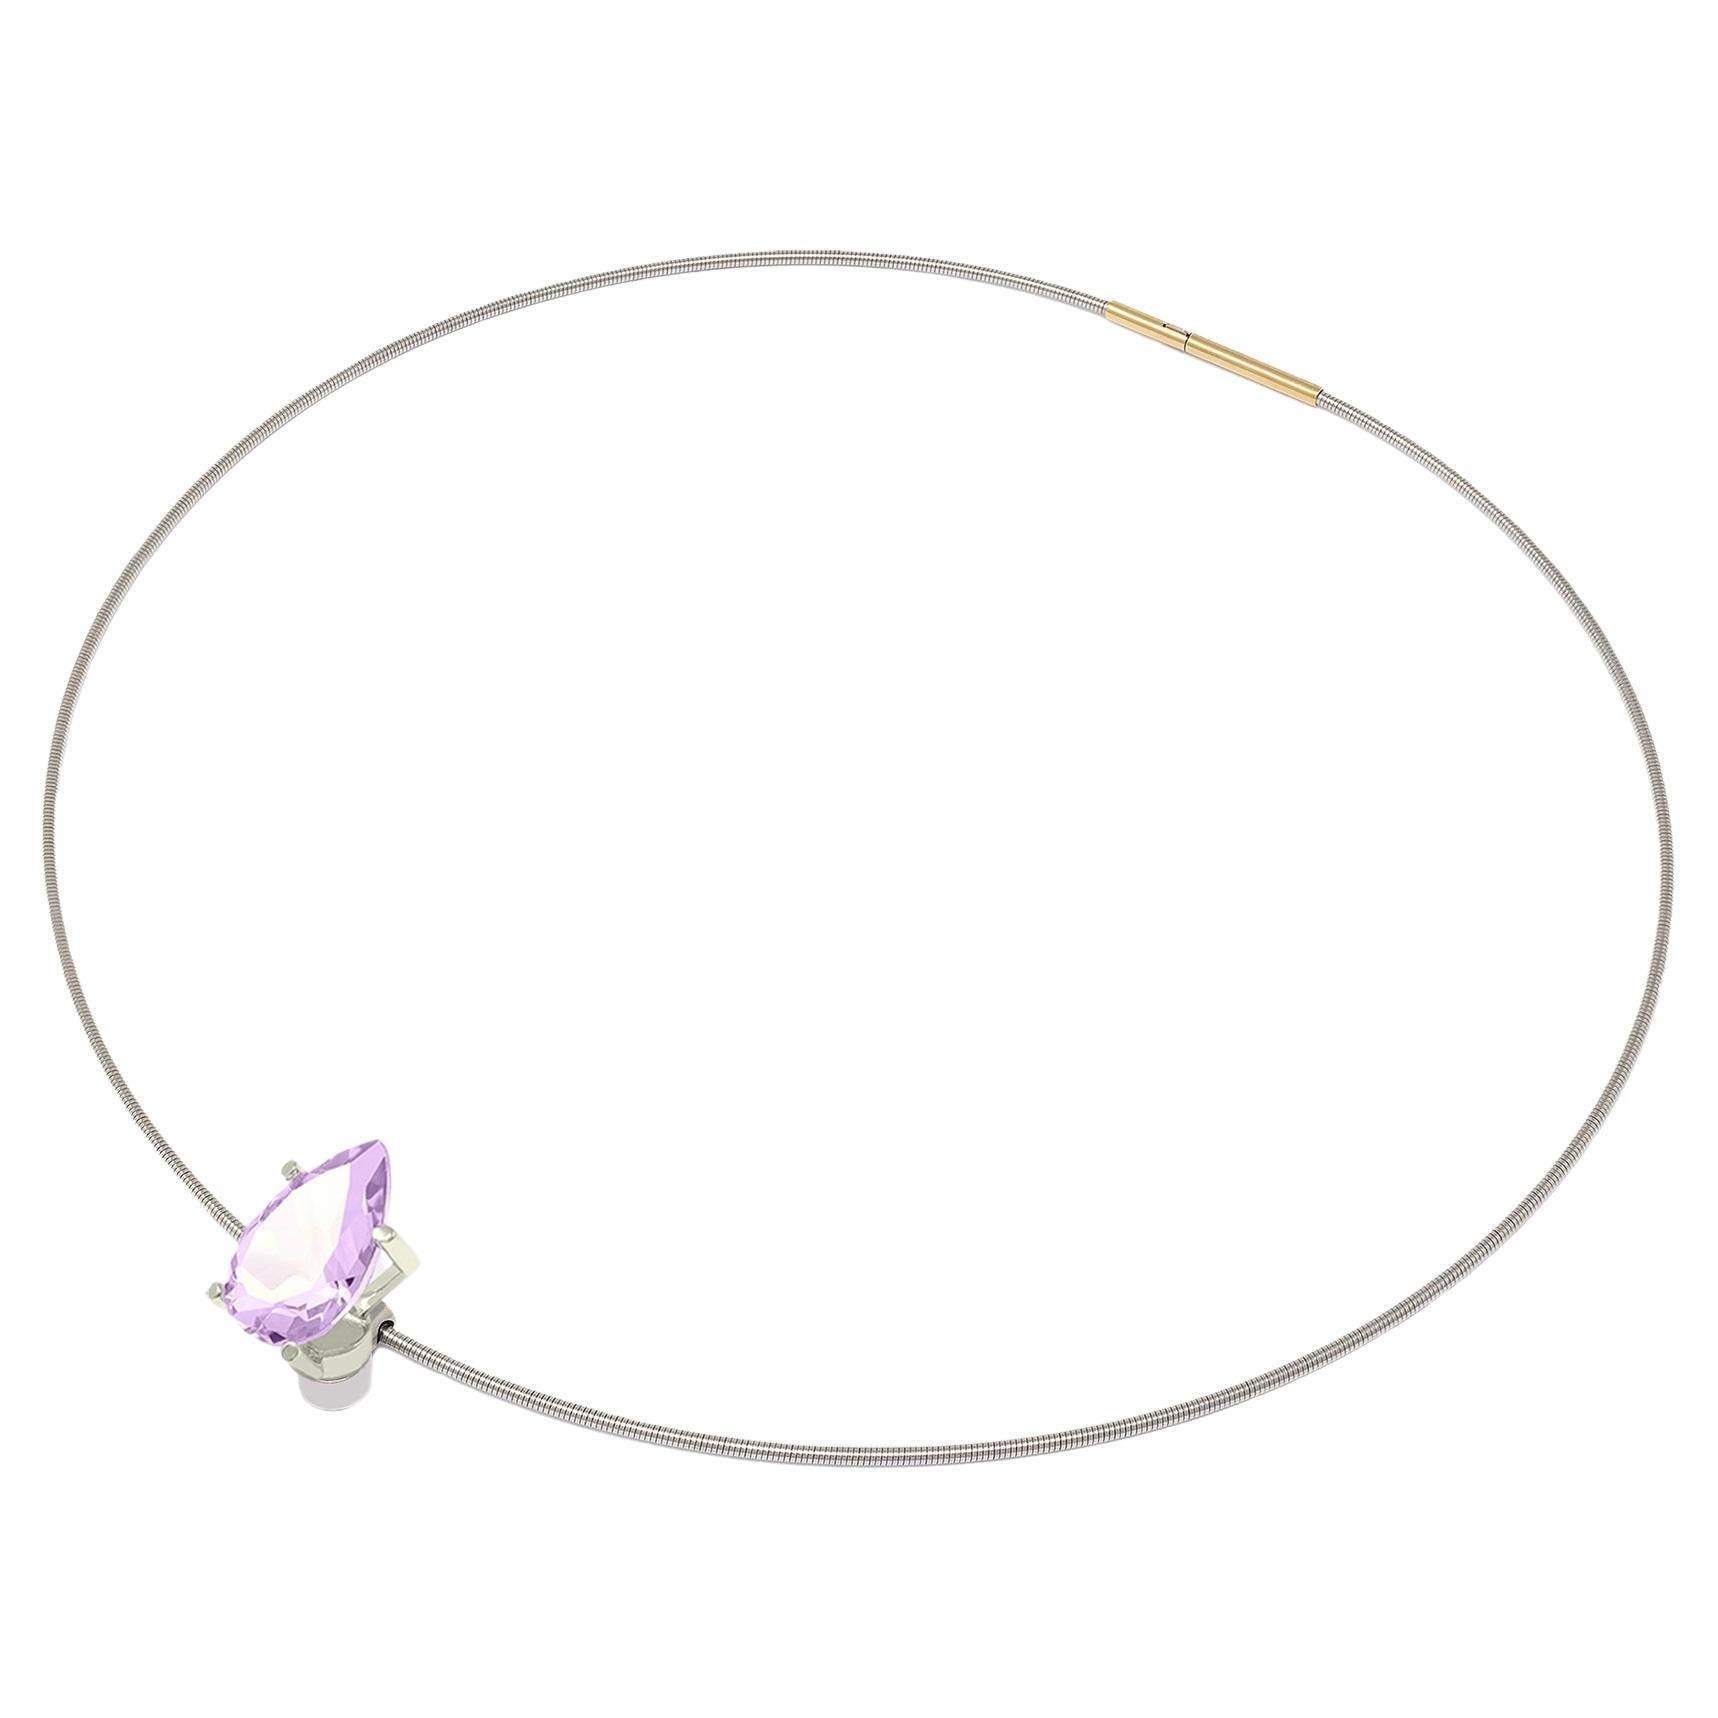 Necklace with Pink Amethyst, 18k and Surgical Steel For Sale